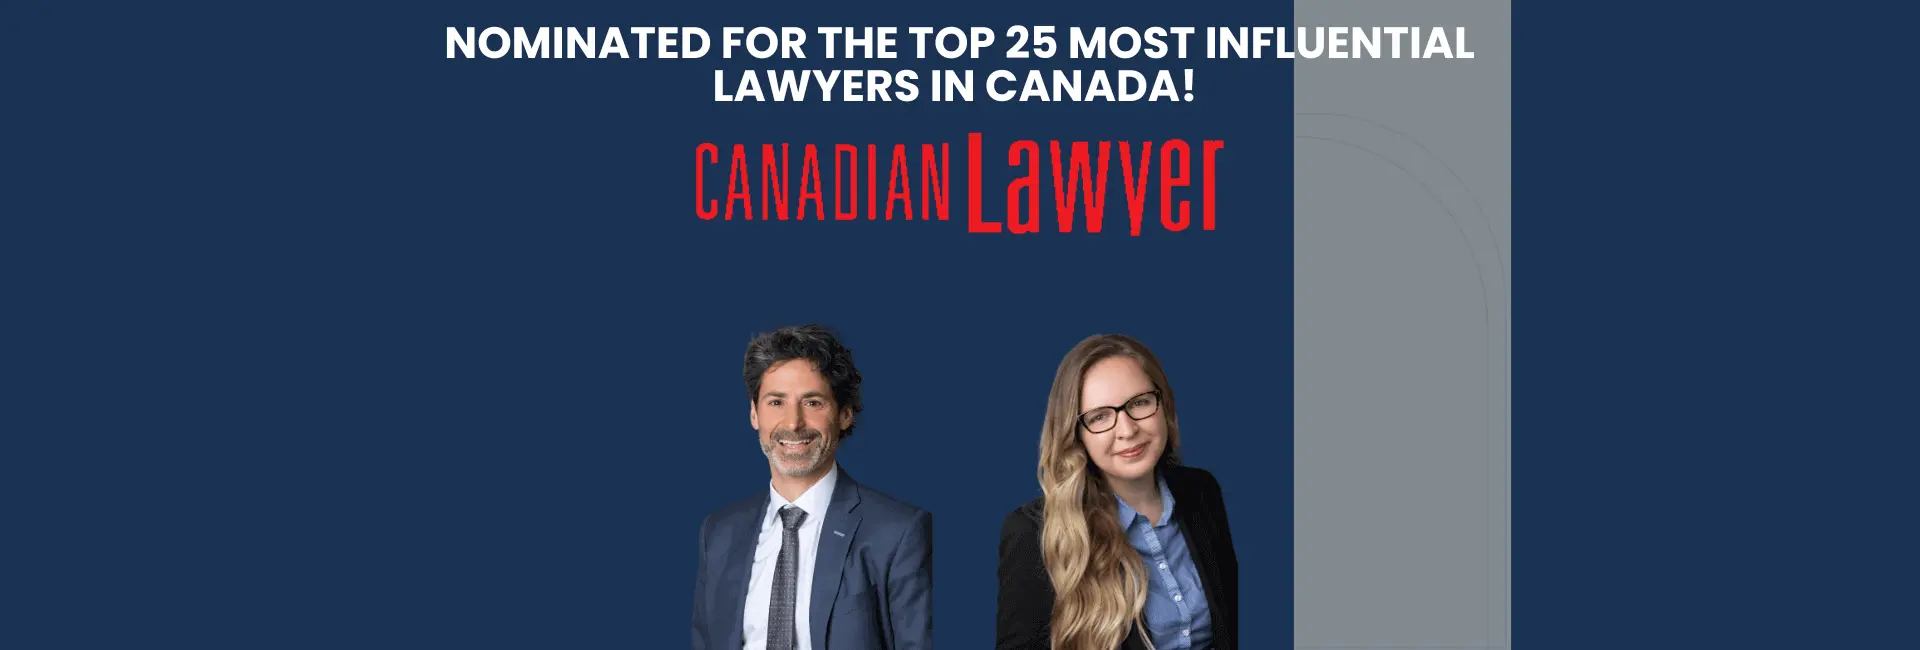 Text: "Nominated for the top 25 most influential lawyers in Canada!". Below the text reads: Canadian Lawyer. Charles Gluckstein and Ivanna Iwasykiw are photographed below the text.